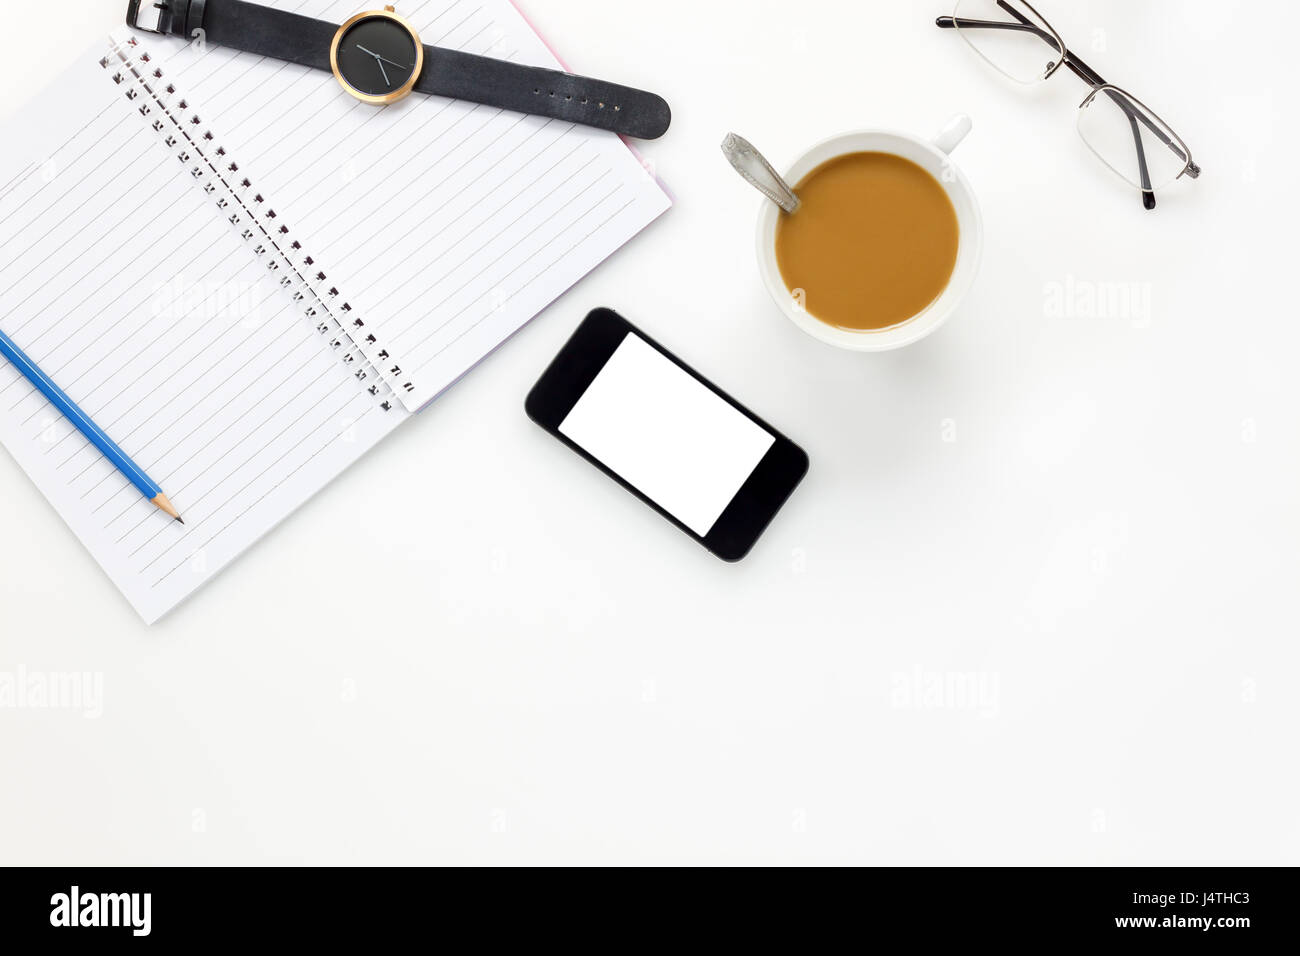 Top view business office desk.mobile phone,eyeglasses,watch,coffee,notebook,pencil on white office desk with copy space. Stock Photo